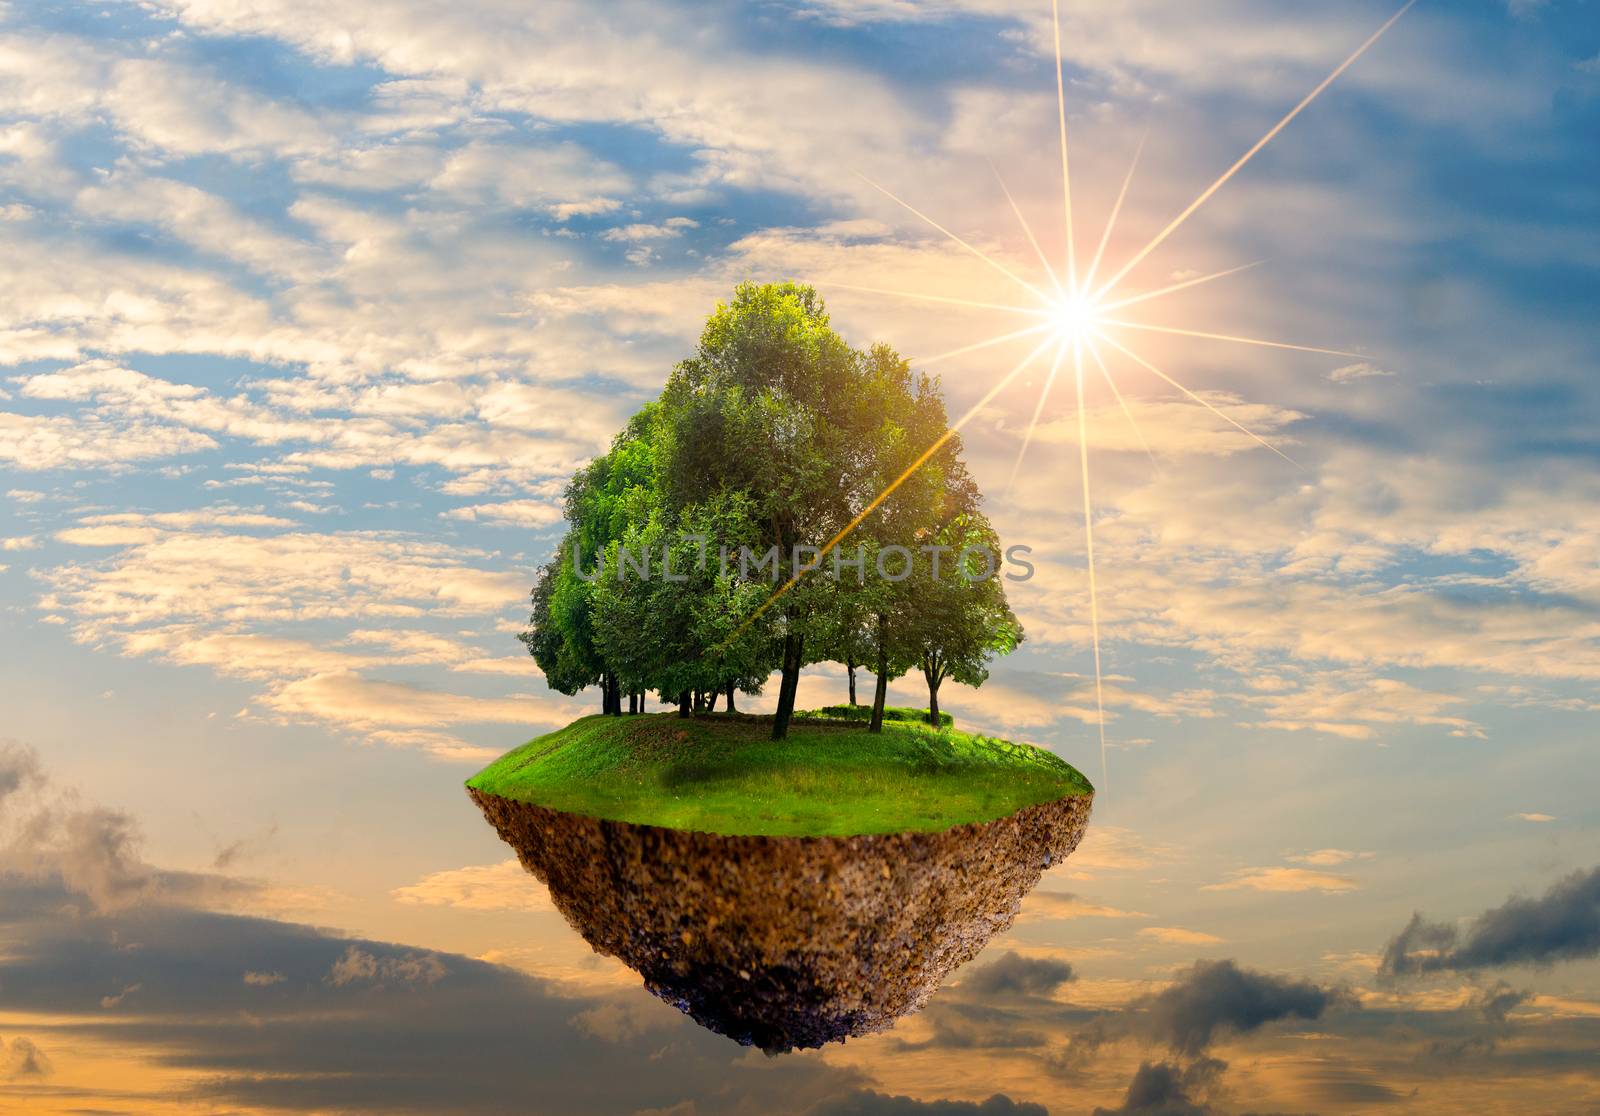 Floating islands with trees in the sky World Environment Day World Conservation Day environment